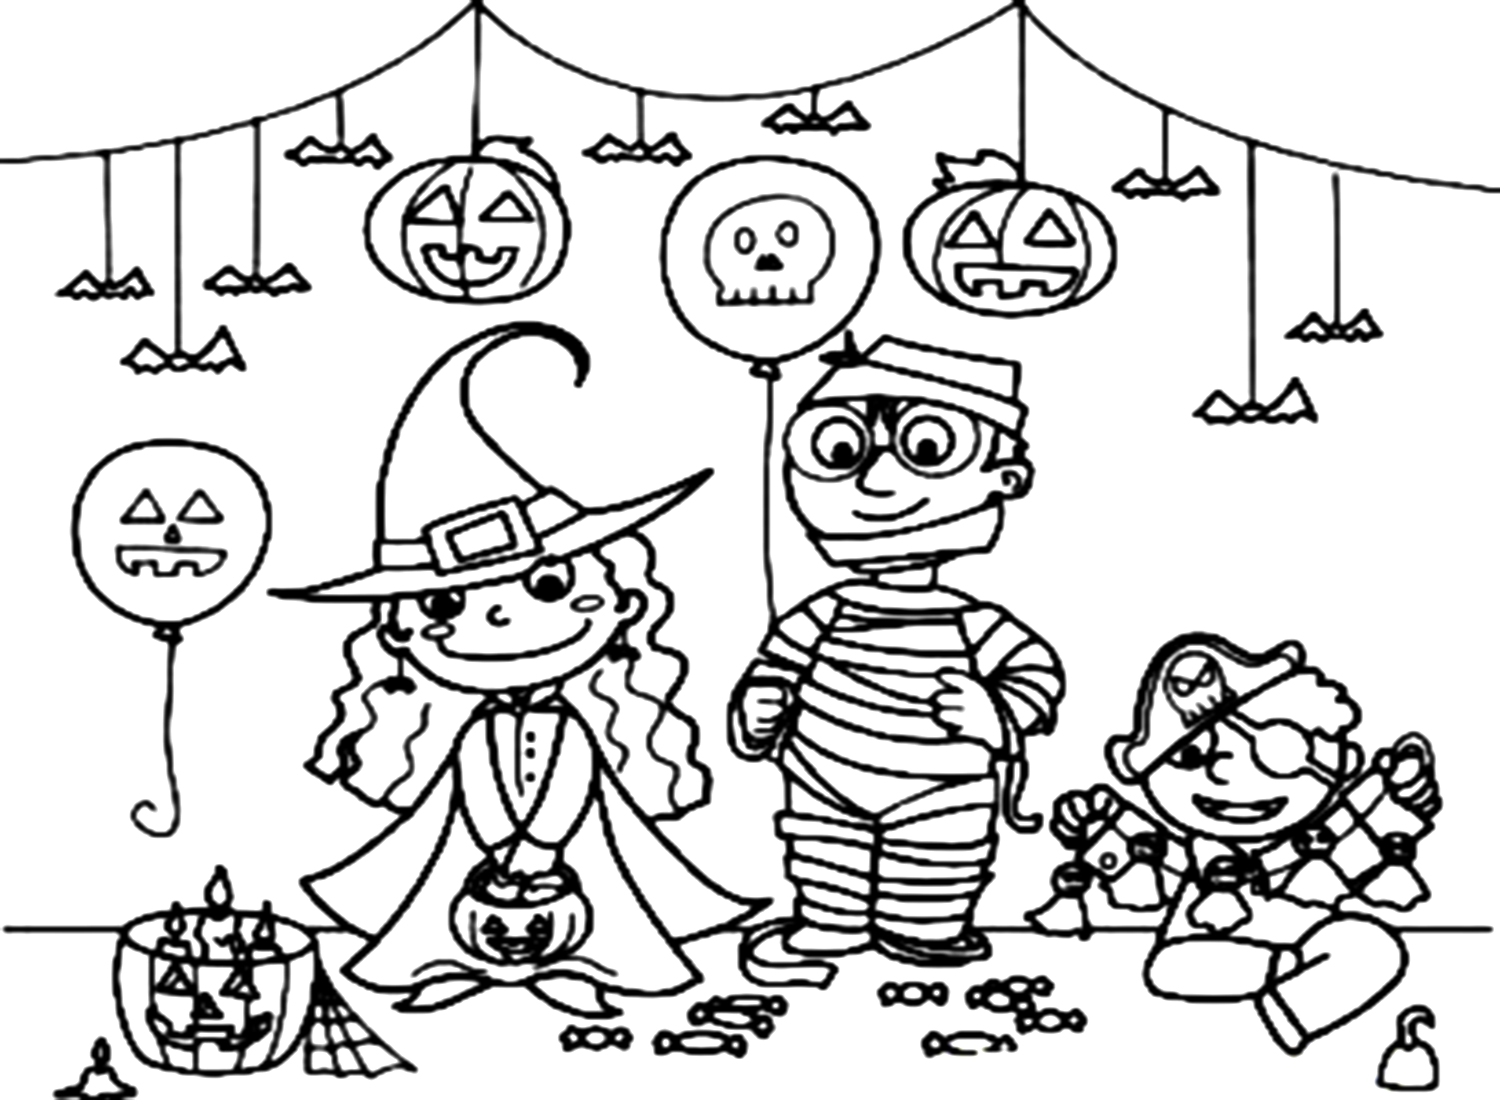 Halloween Monsters Coloring Pages - Coloring Pages For Kids And Adults